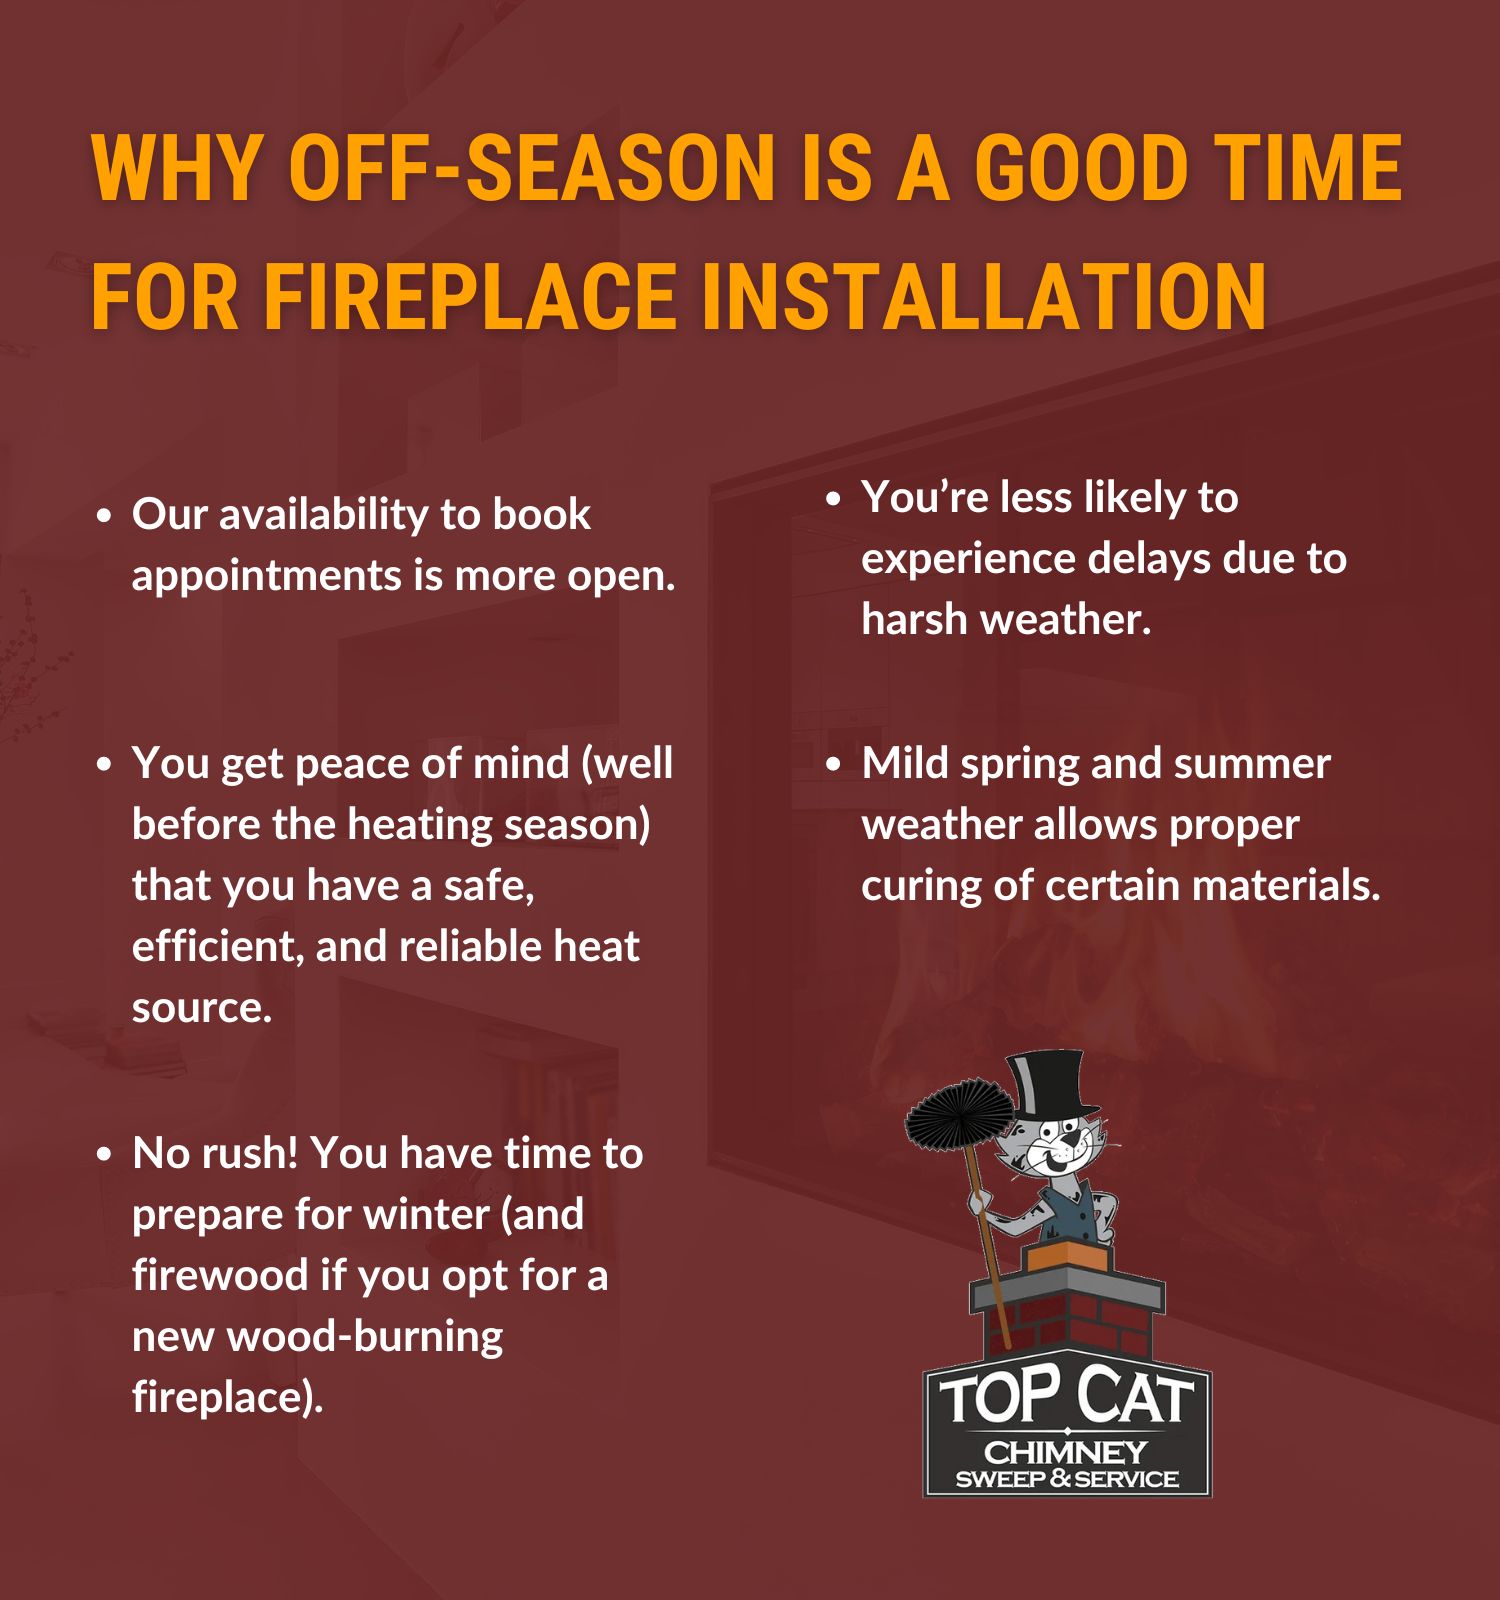 original infographic stating why the off season in a good time for fireplace installation